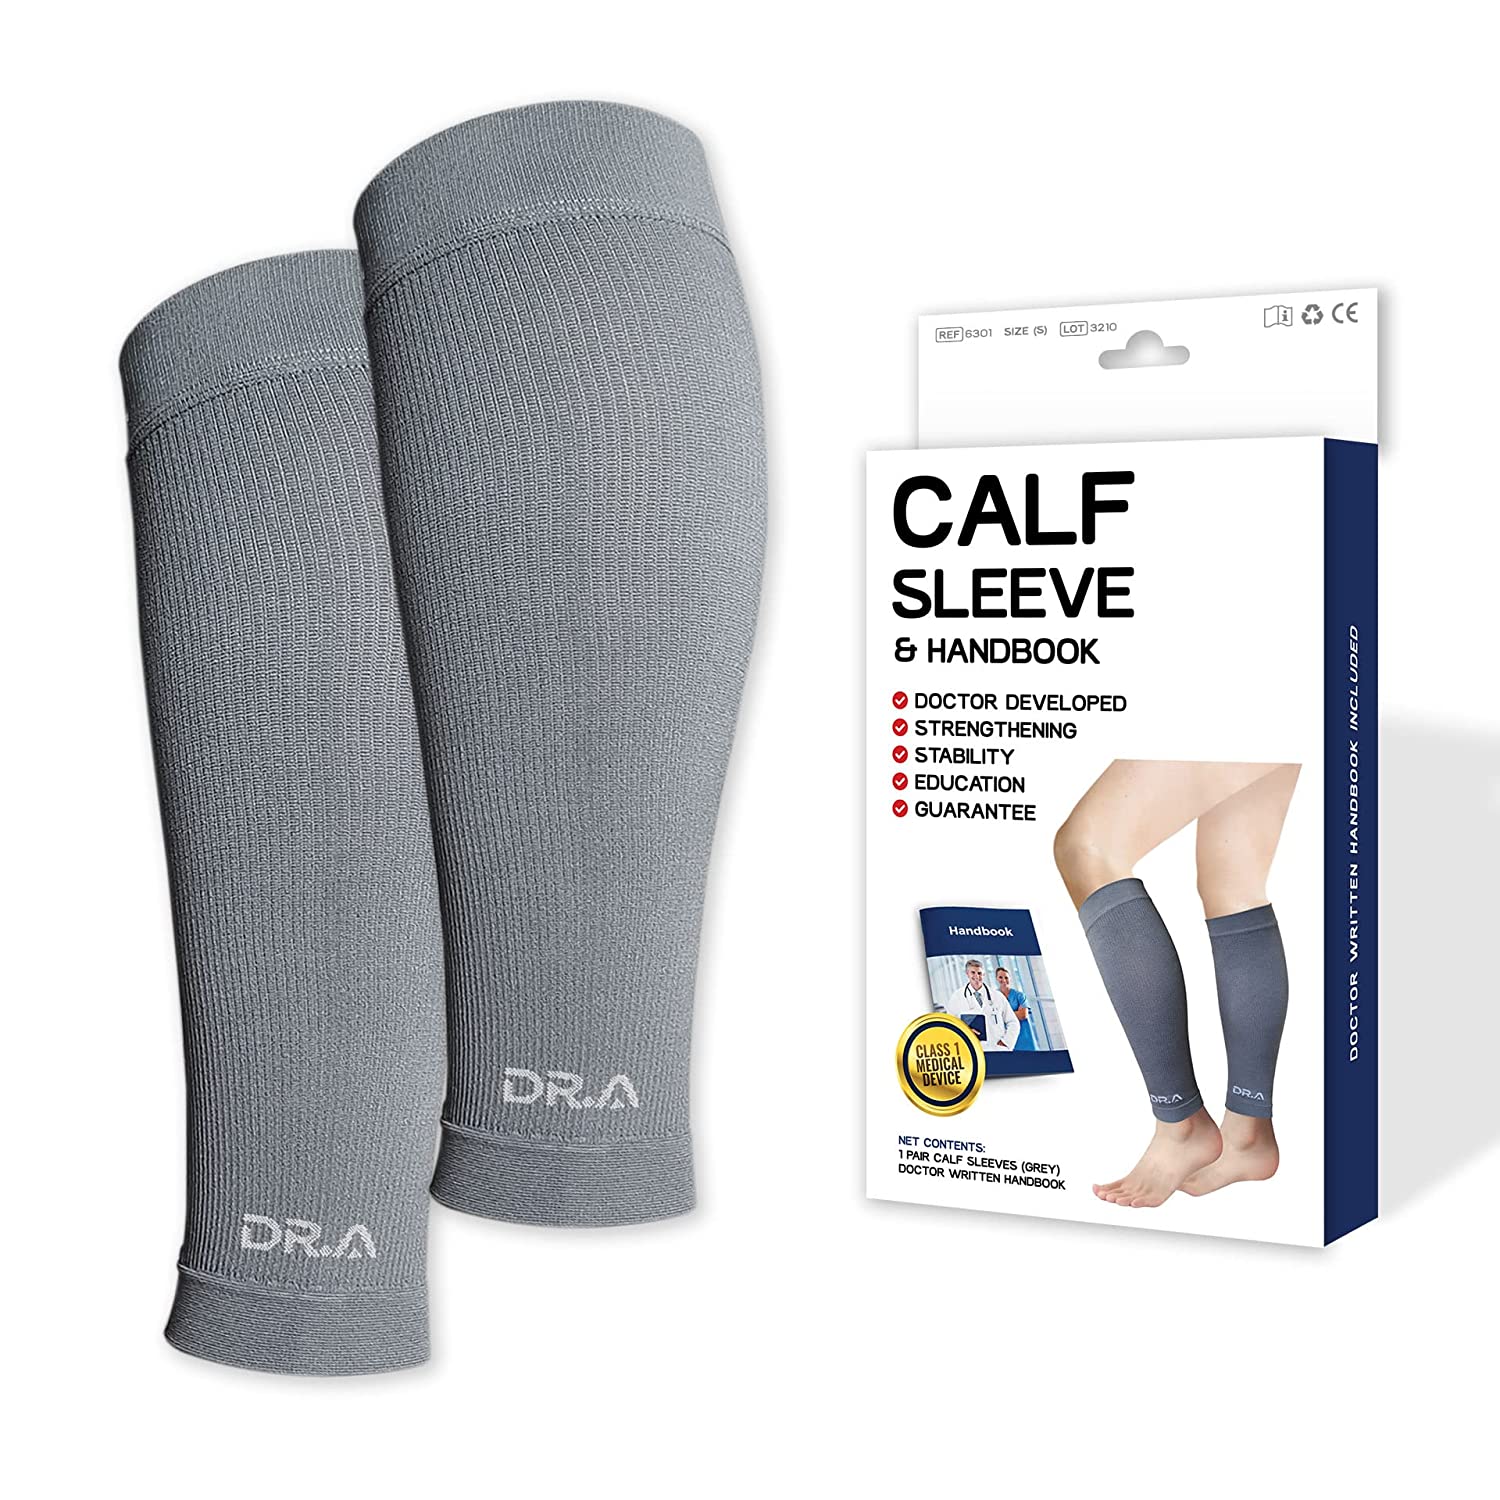 Calf Compression Sleeves for Men and Women - Leg Compression